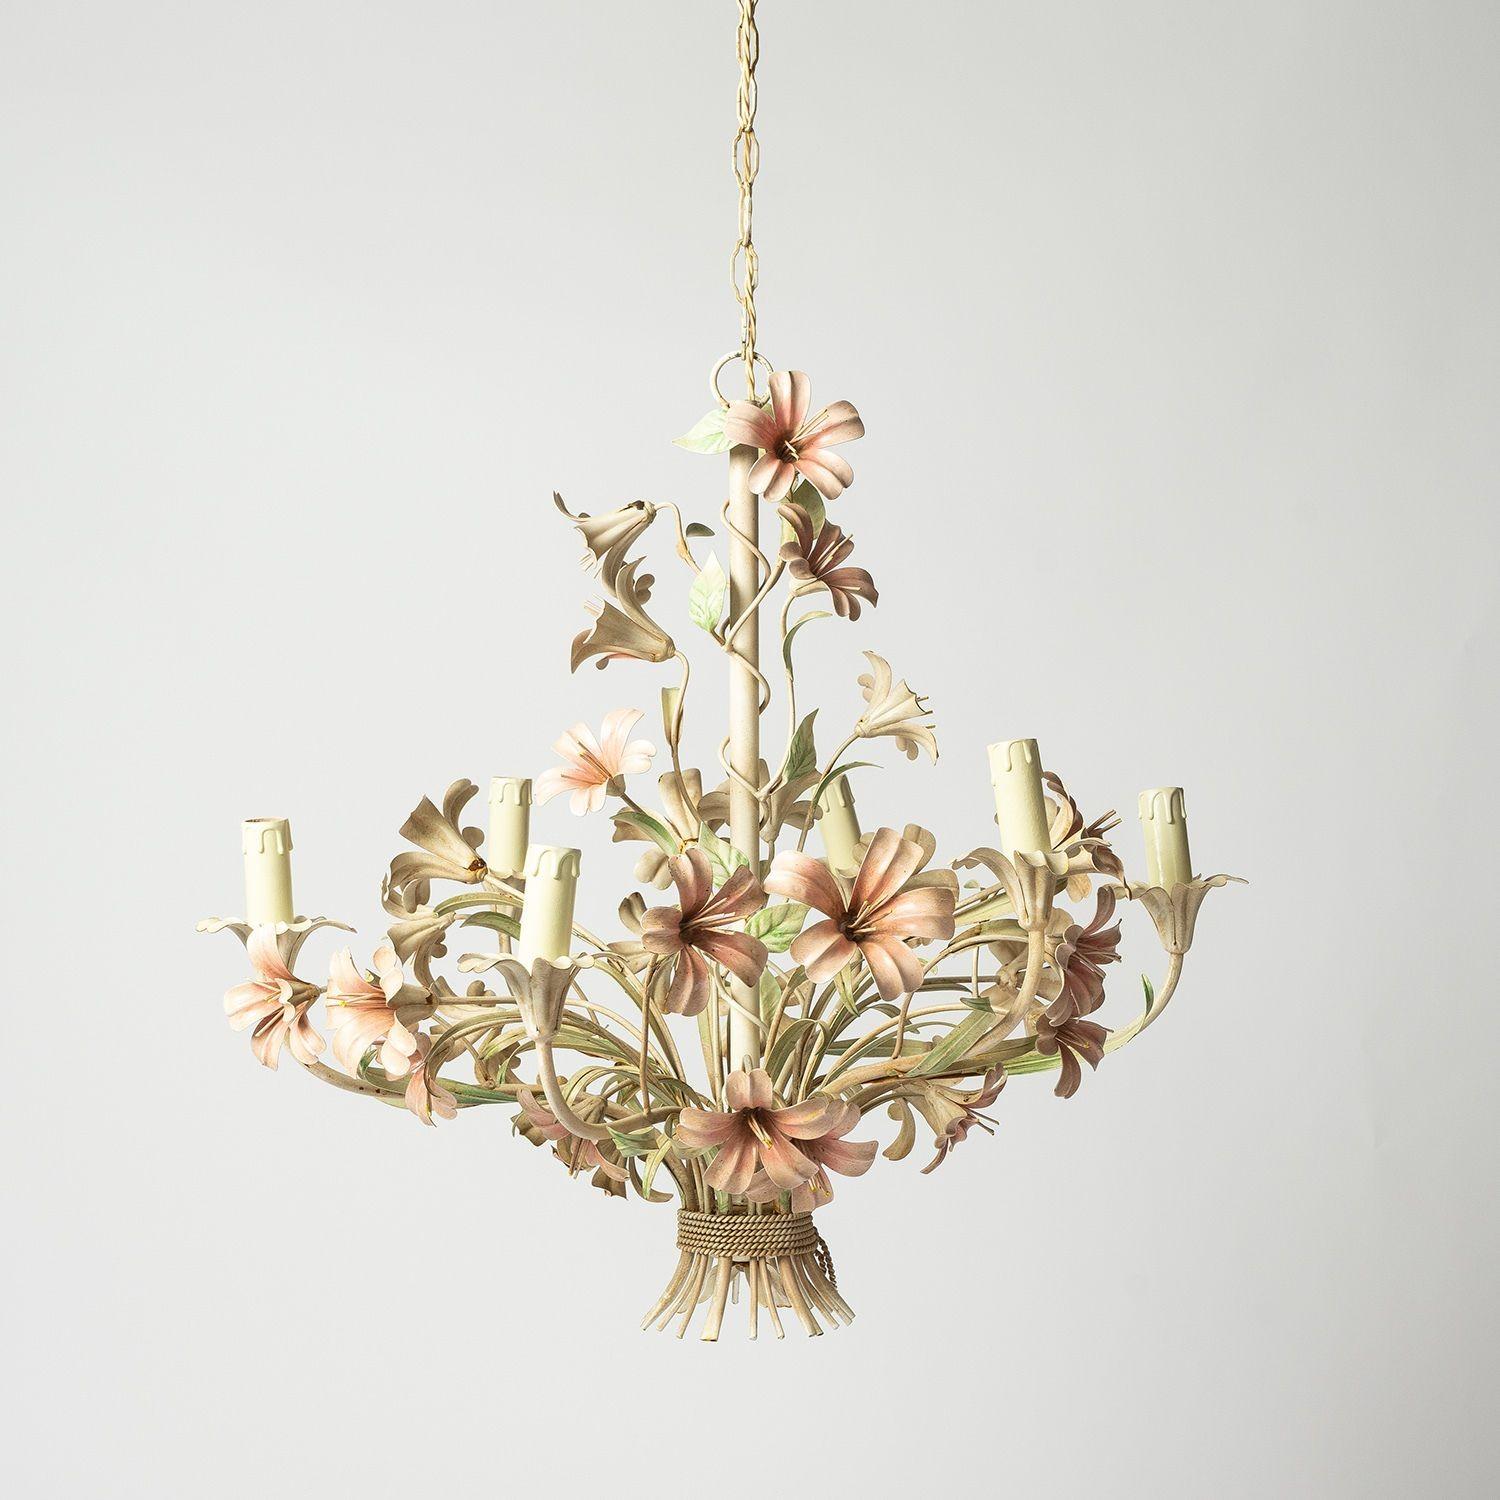 Large Floral Toleware Chandelier with Hibiscus Flowers 1